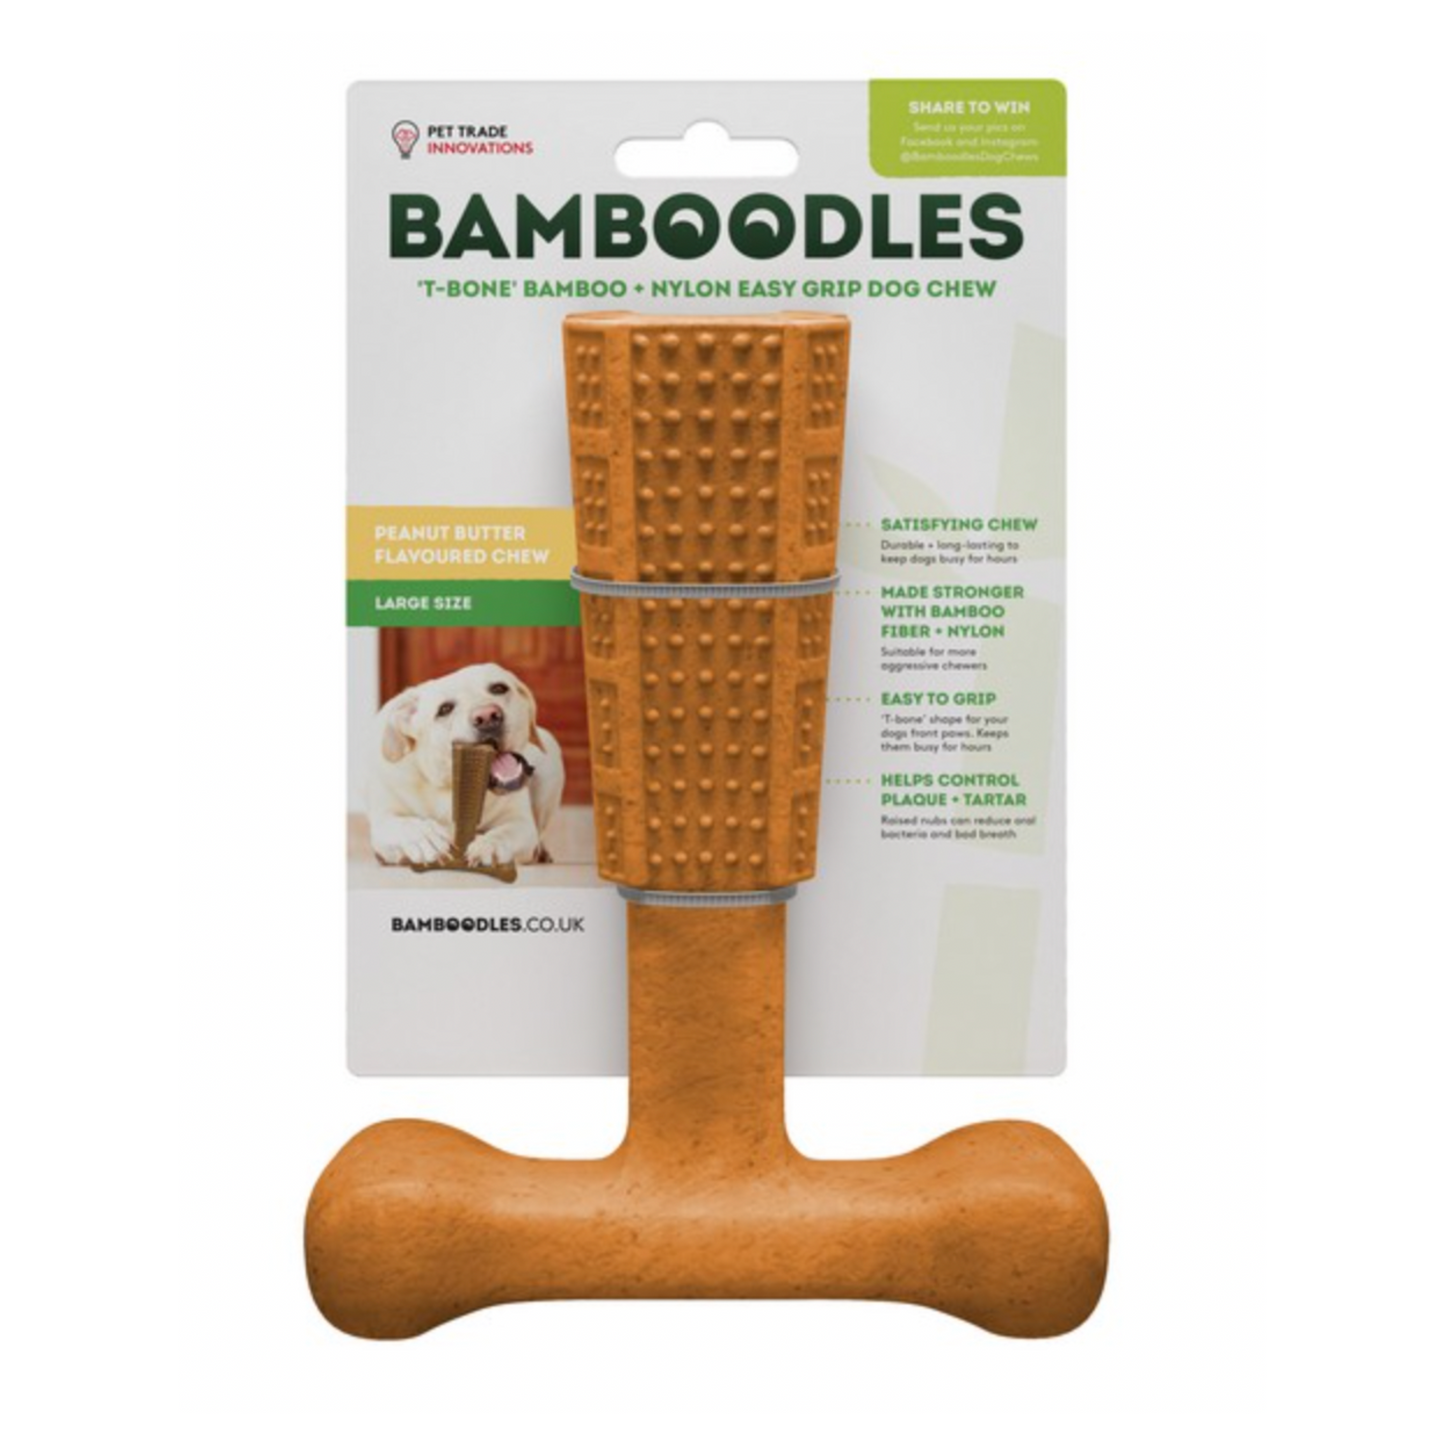 Bamboodles T-Bone Shape Tough Dog Chew Toy Easy To Grip With Paws Peanut Butter Flavour Small, Medium & Large